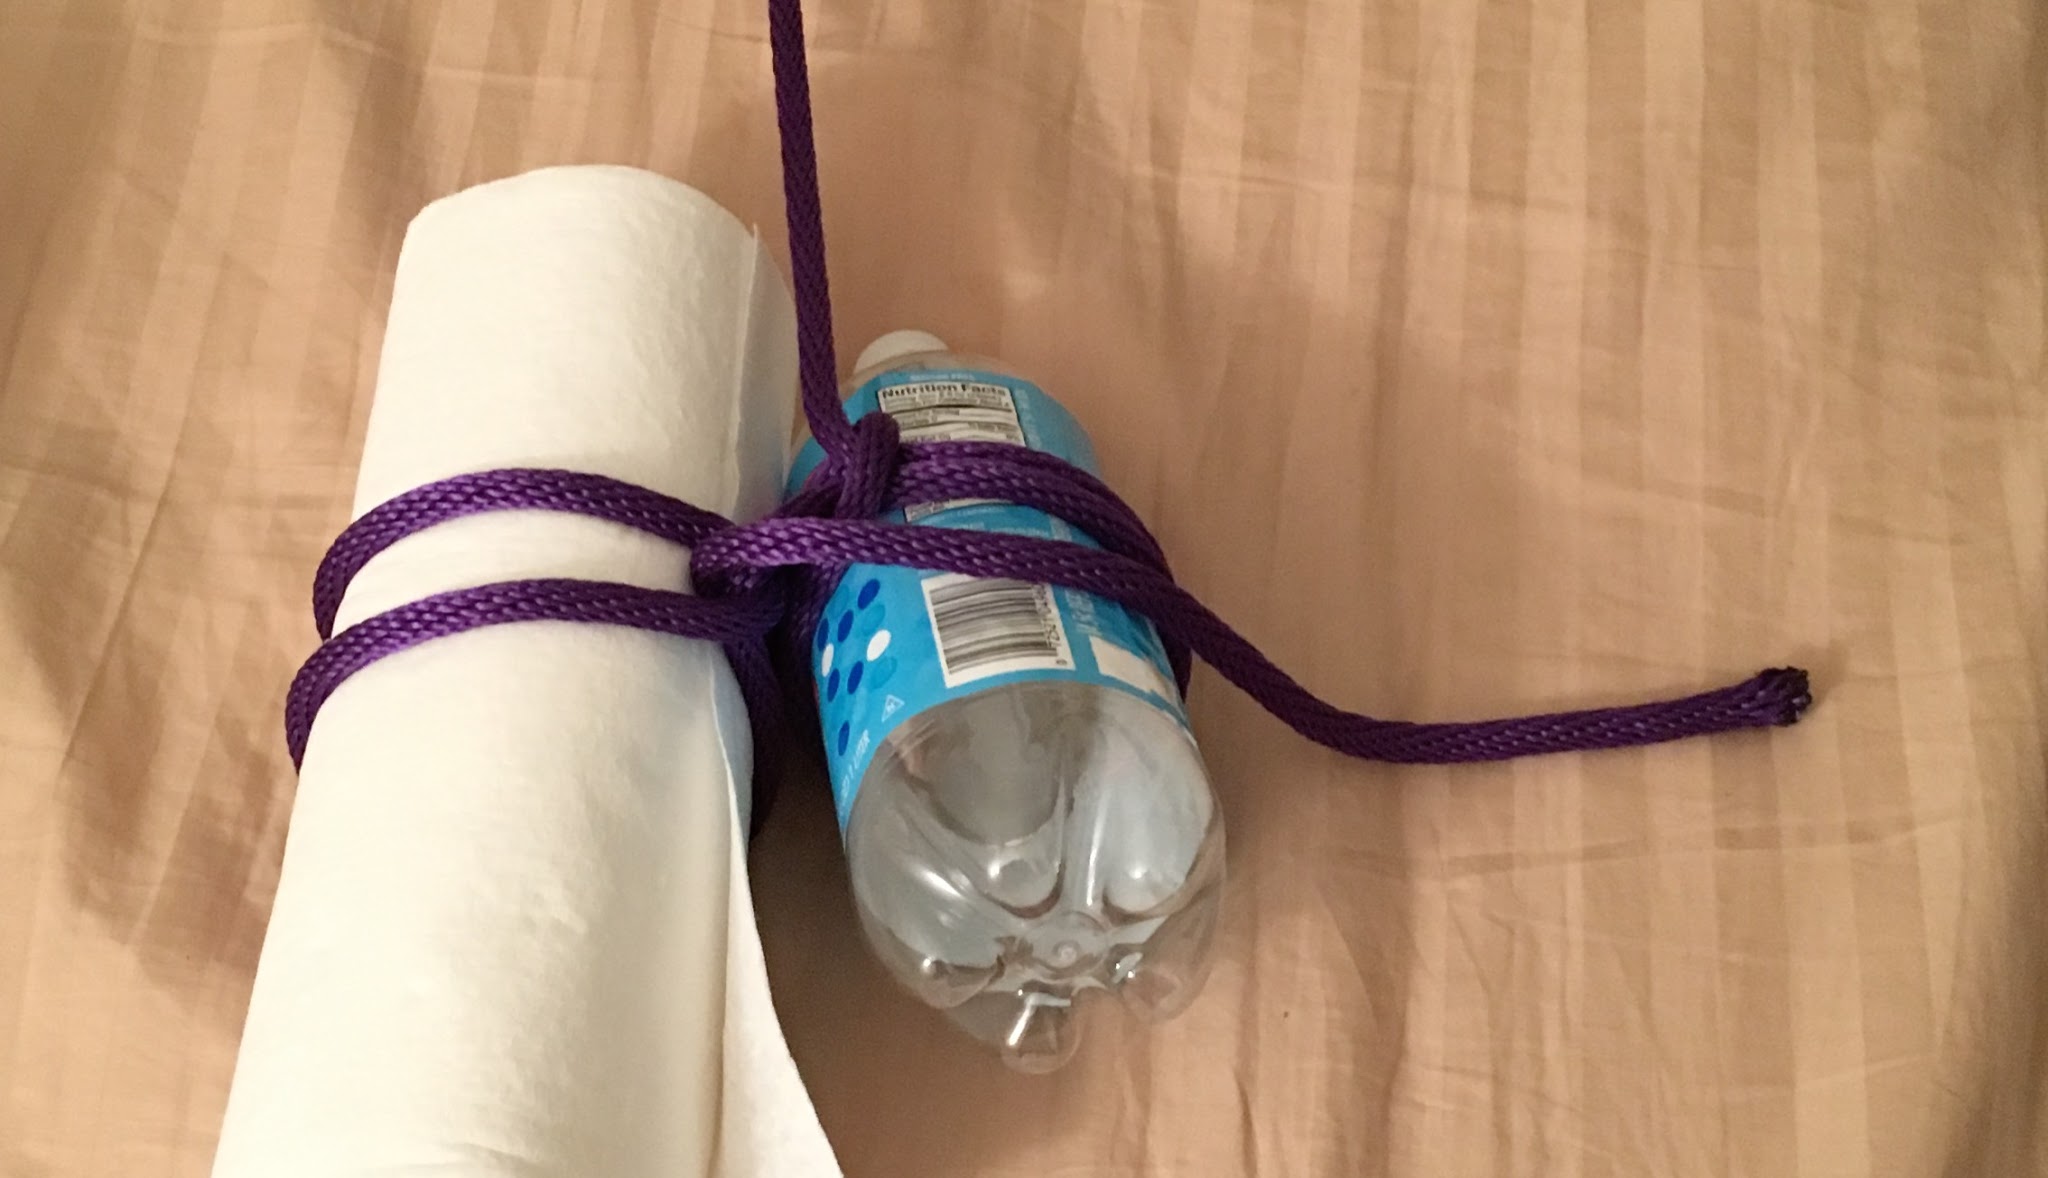 rope tied around a paper towel roll and empty seltzer bottle